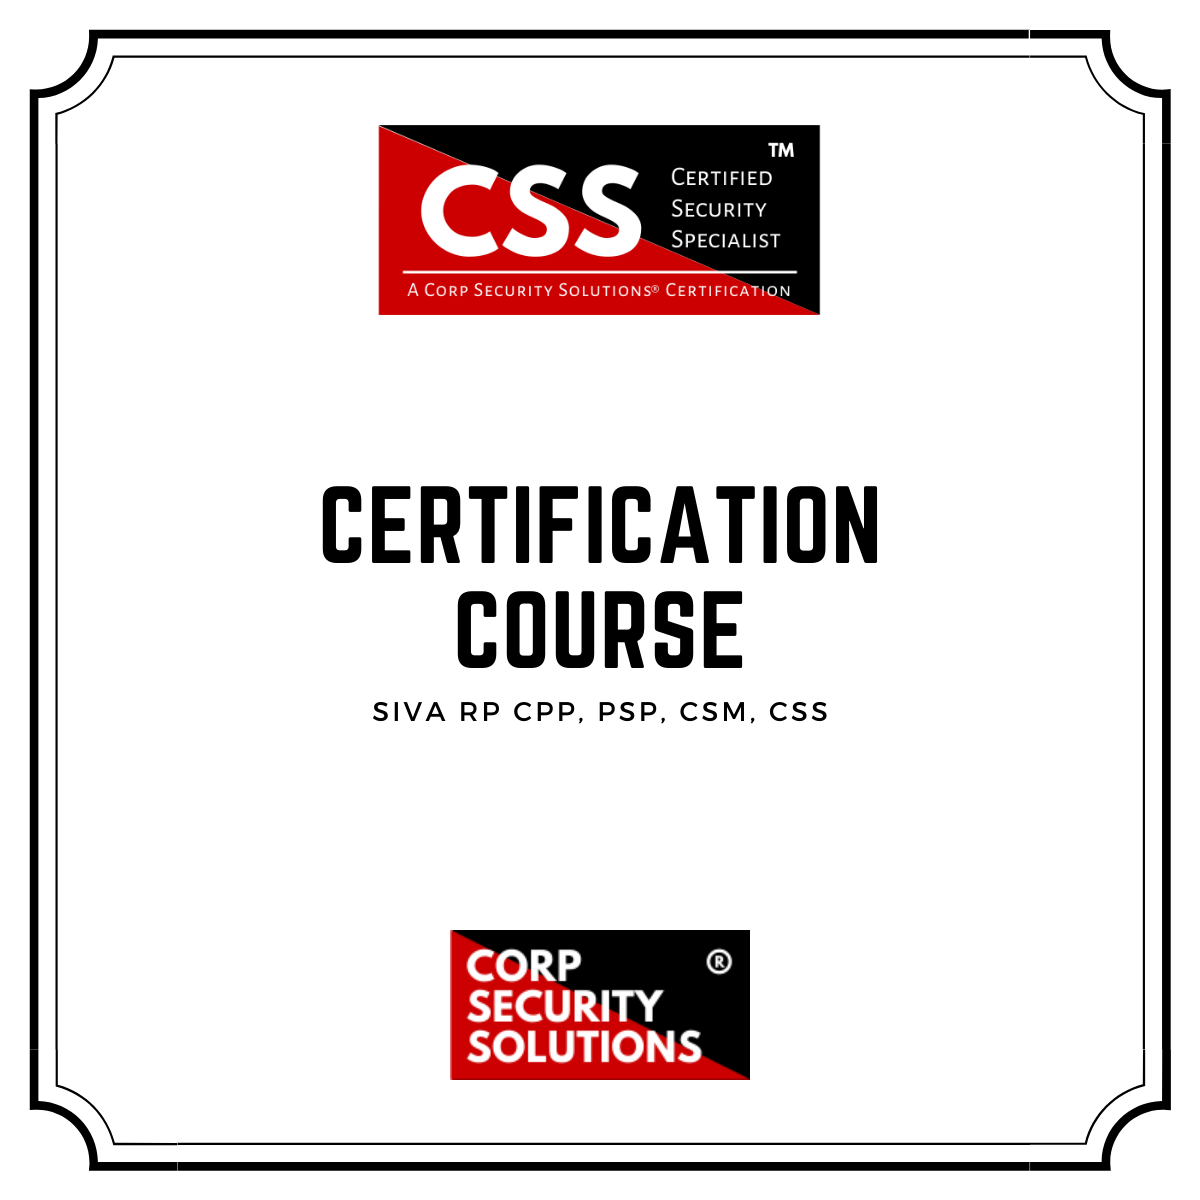 CSS Certification Course  Corp Security Solutions